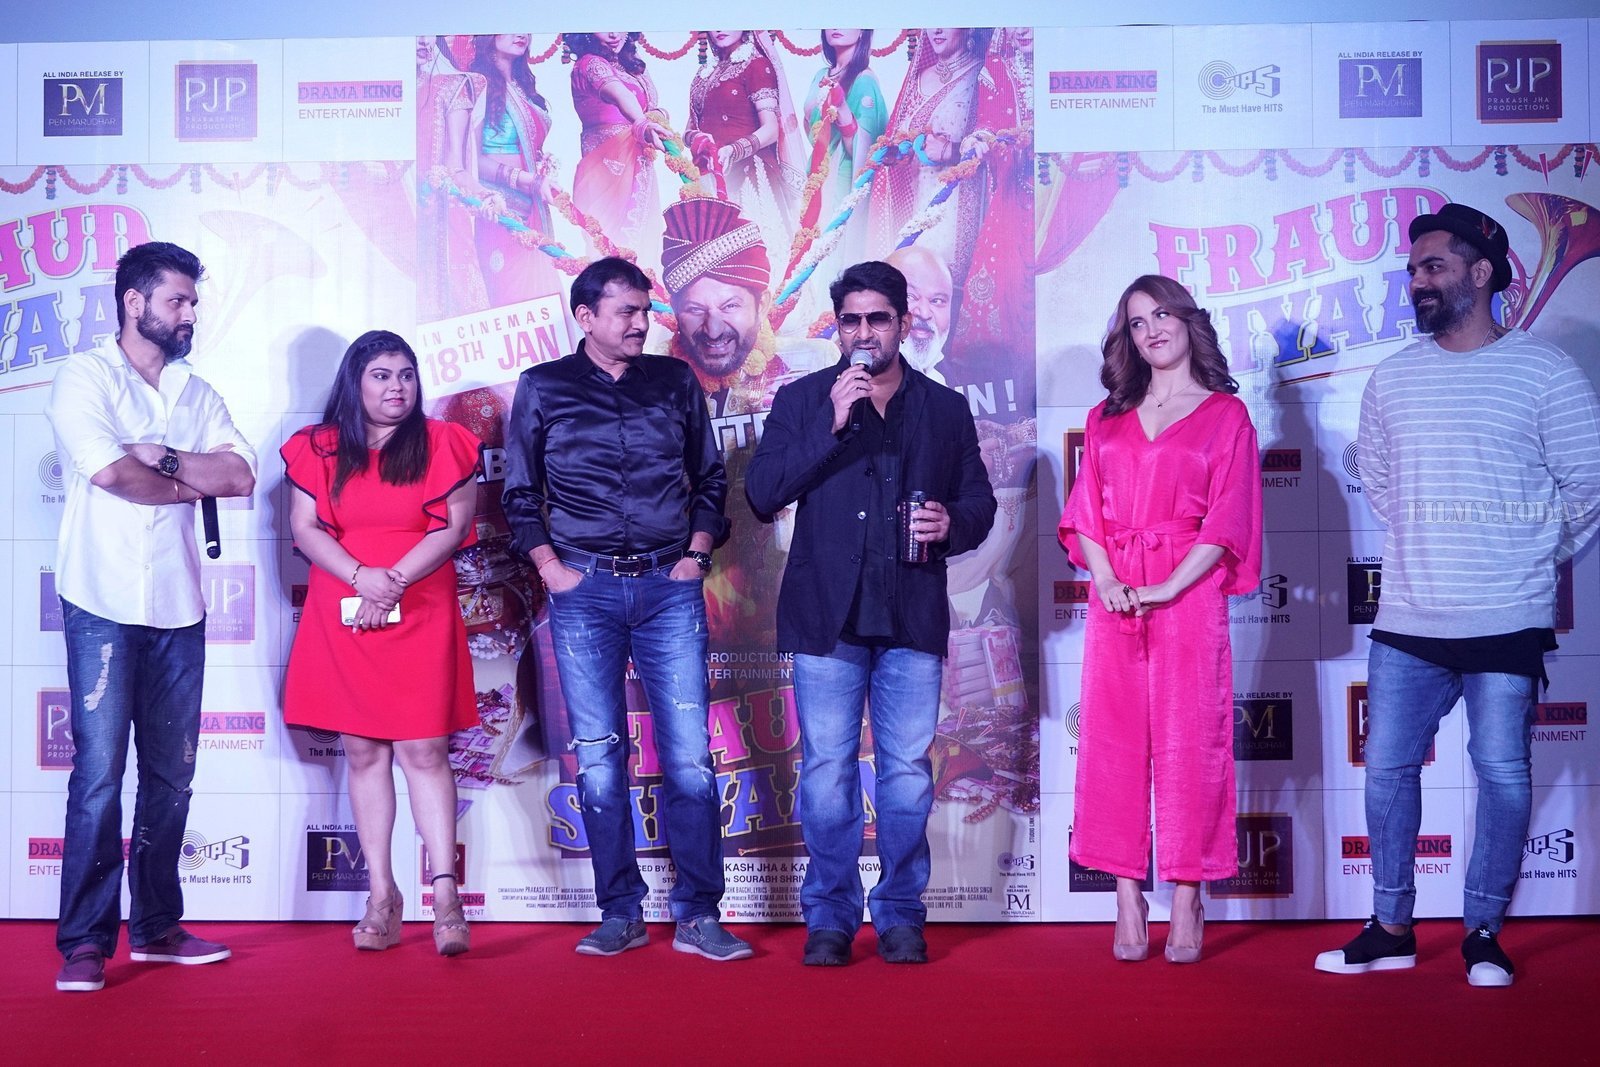 Photos: Song Launch Chamma Chamma For Film Fraud Saiyyan | Picture 1615941